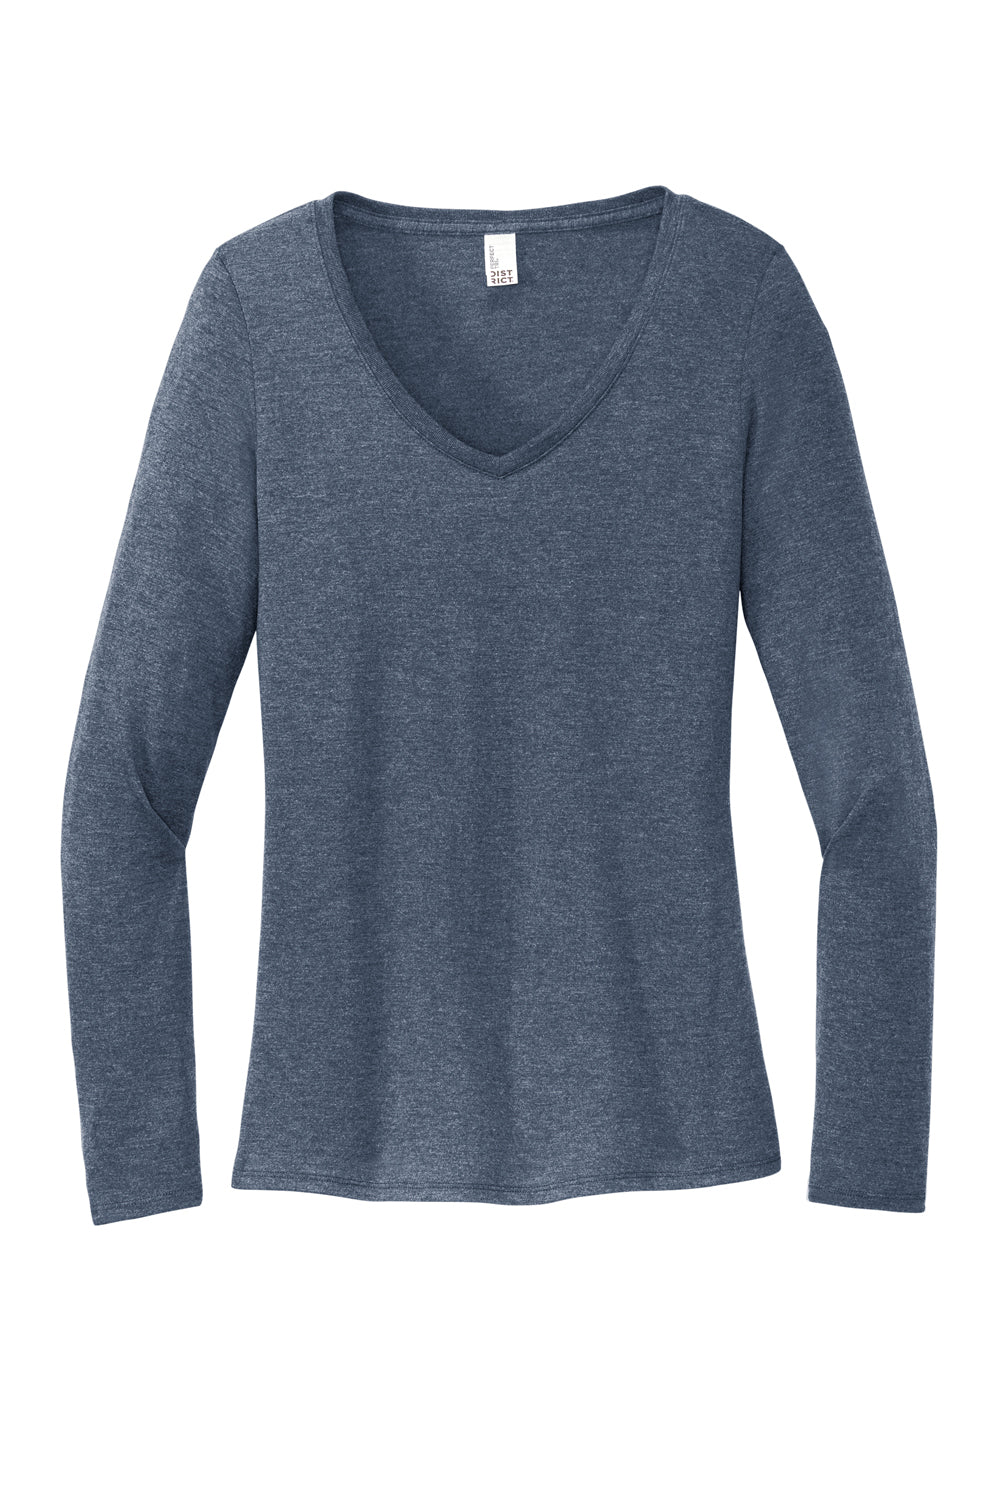 District DT135 Womens Perfect Tri Long Sleeve V-Neck T-Shirt Navy Blue Frost Flat Front